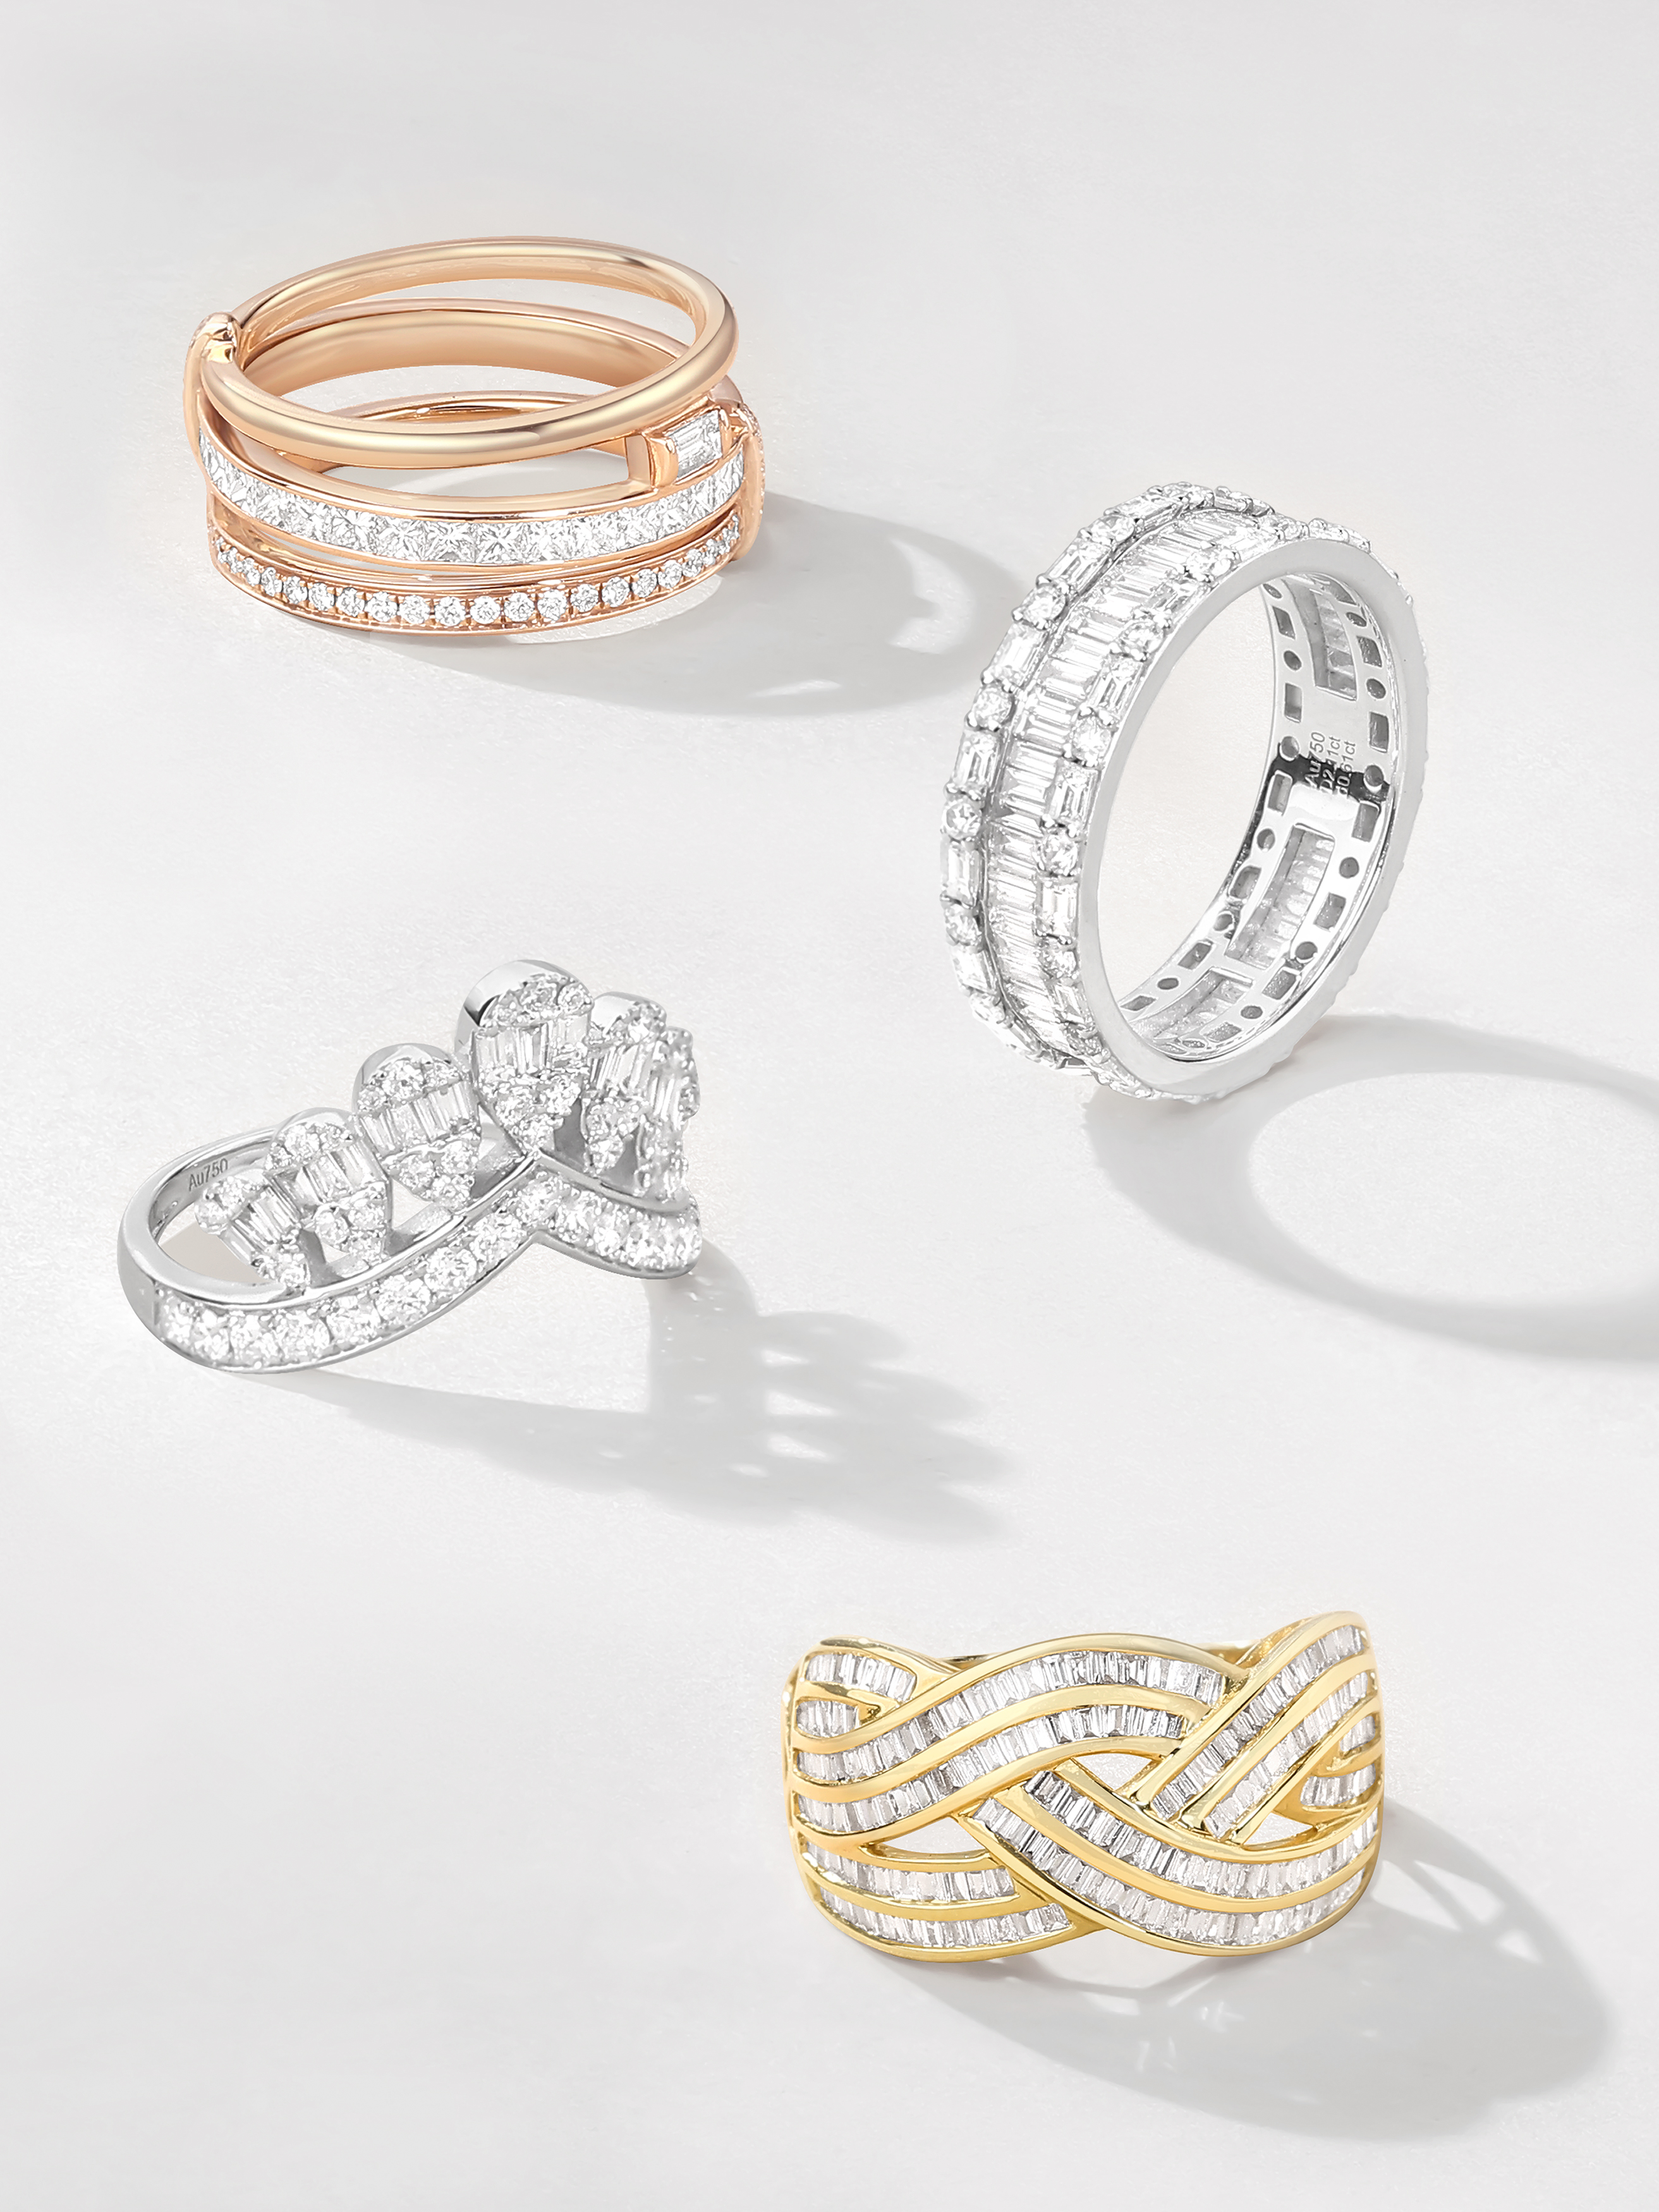 Experience the Luxury of POYAS Jewelry's High-End Wedding Rings